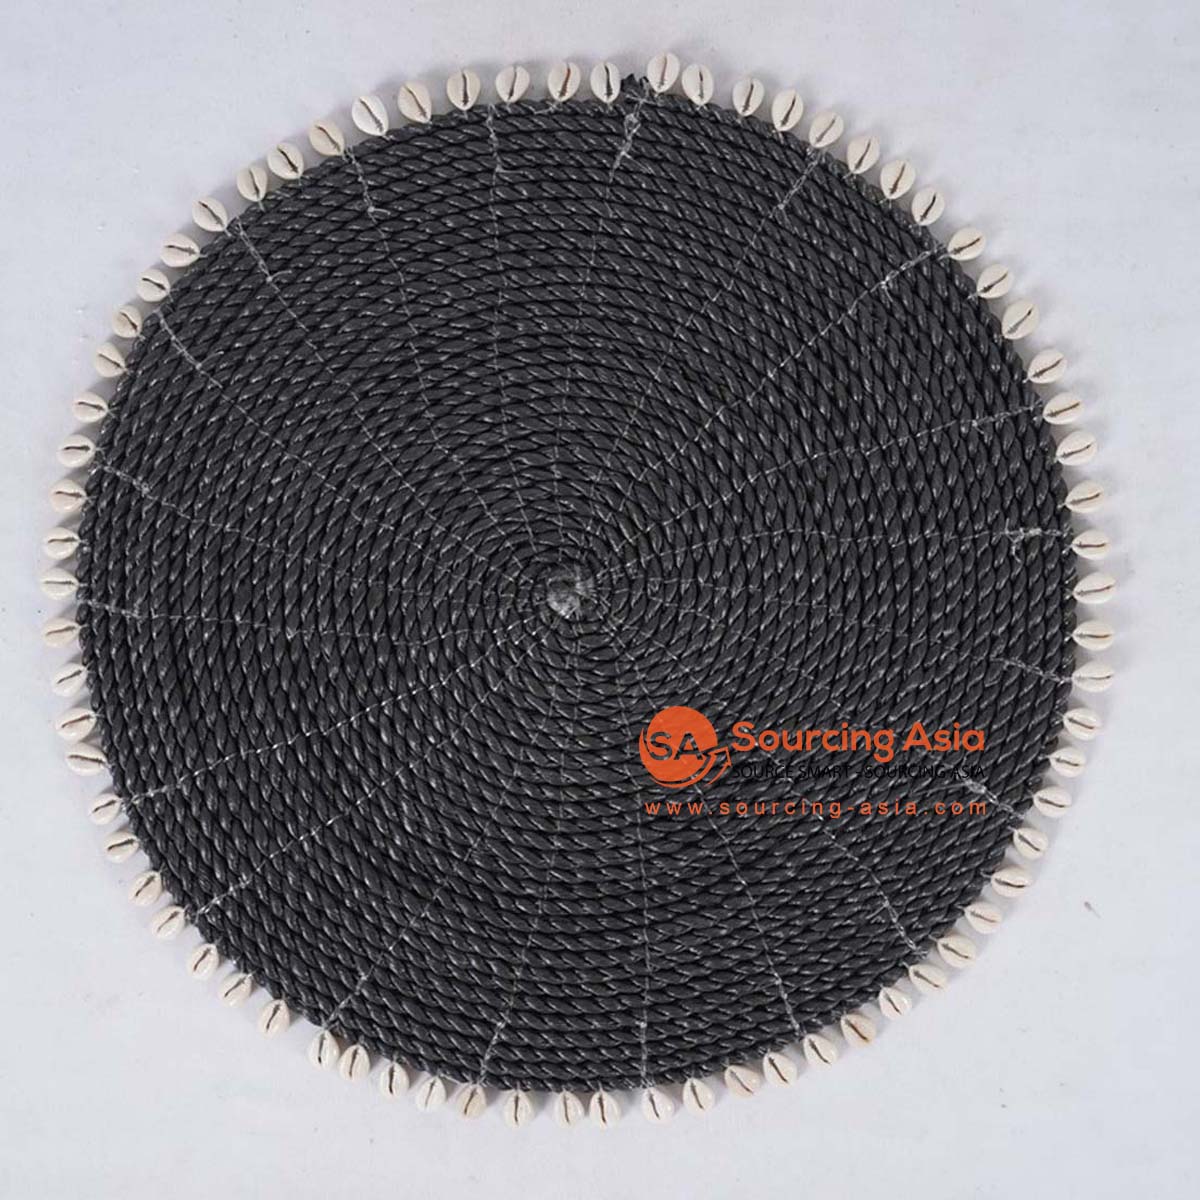 HBSC564 BLACK PLASTIC ROUND PLACEMAT WITH SHELL EDGE